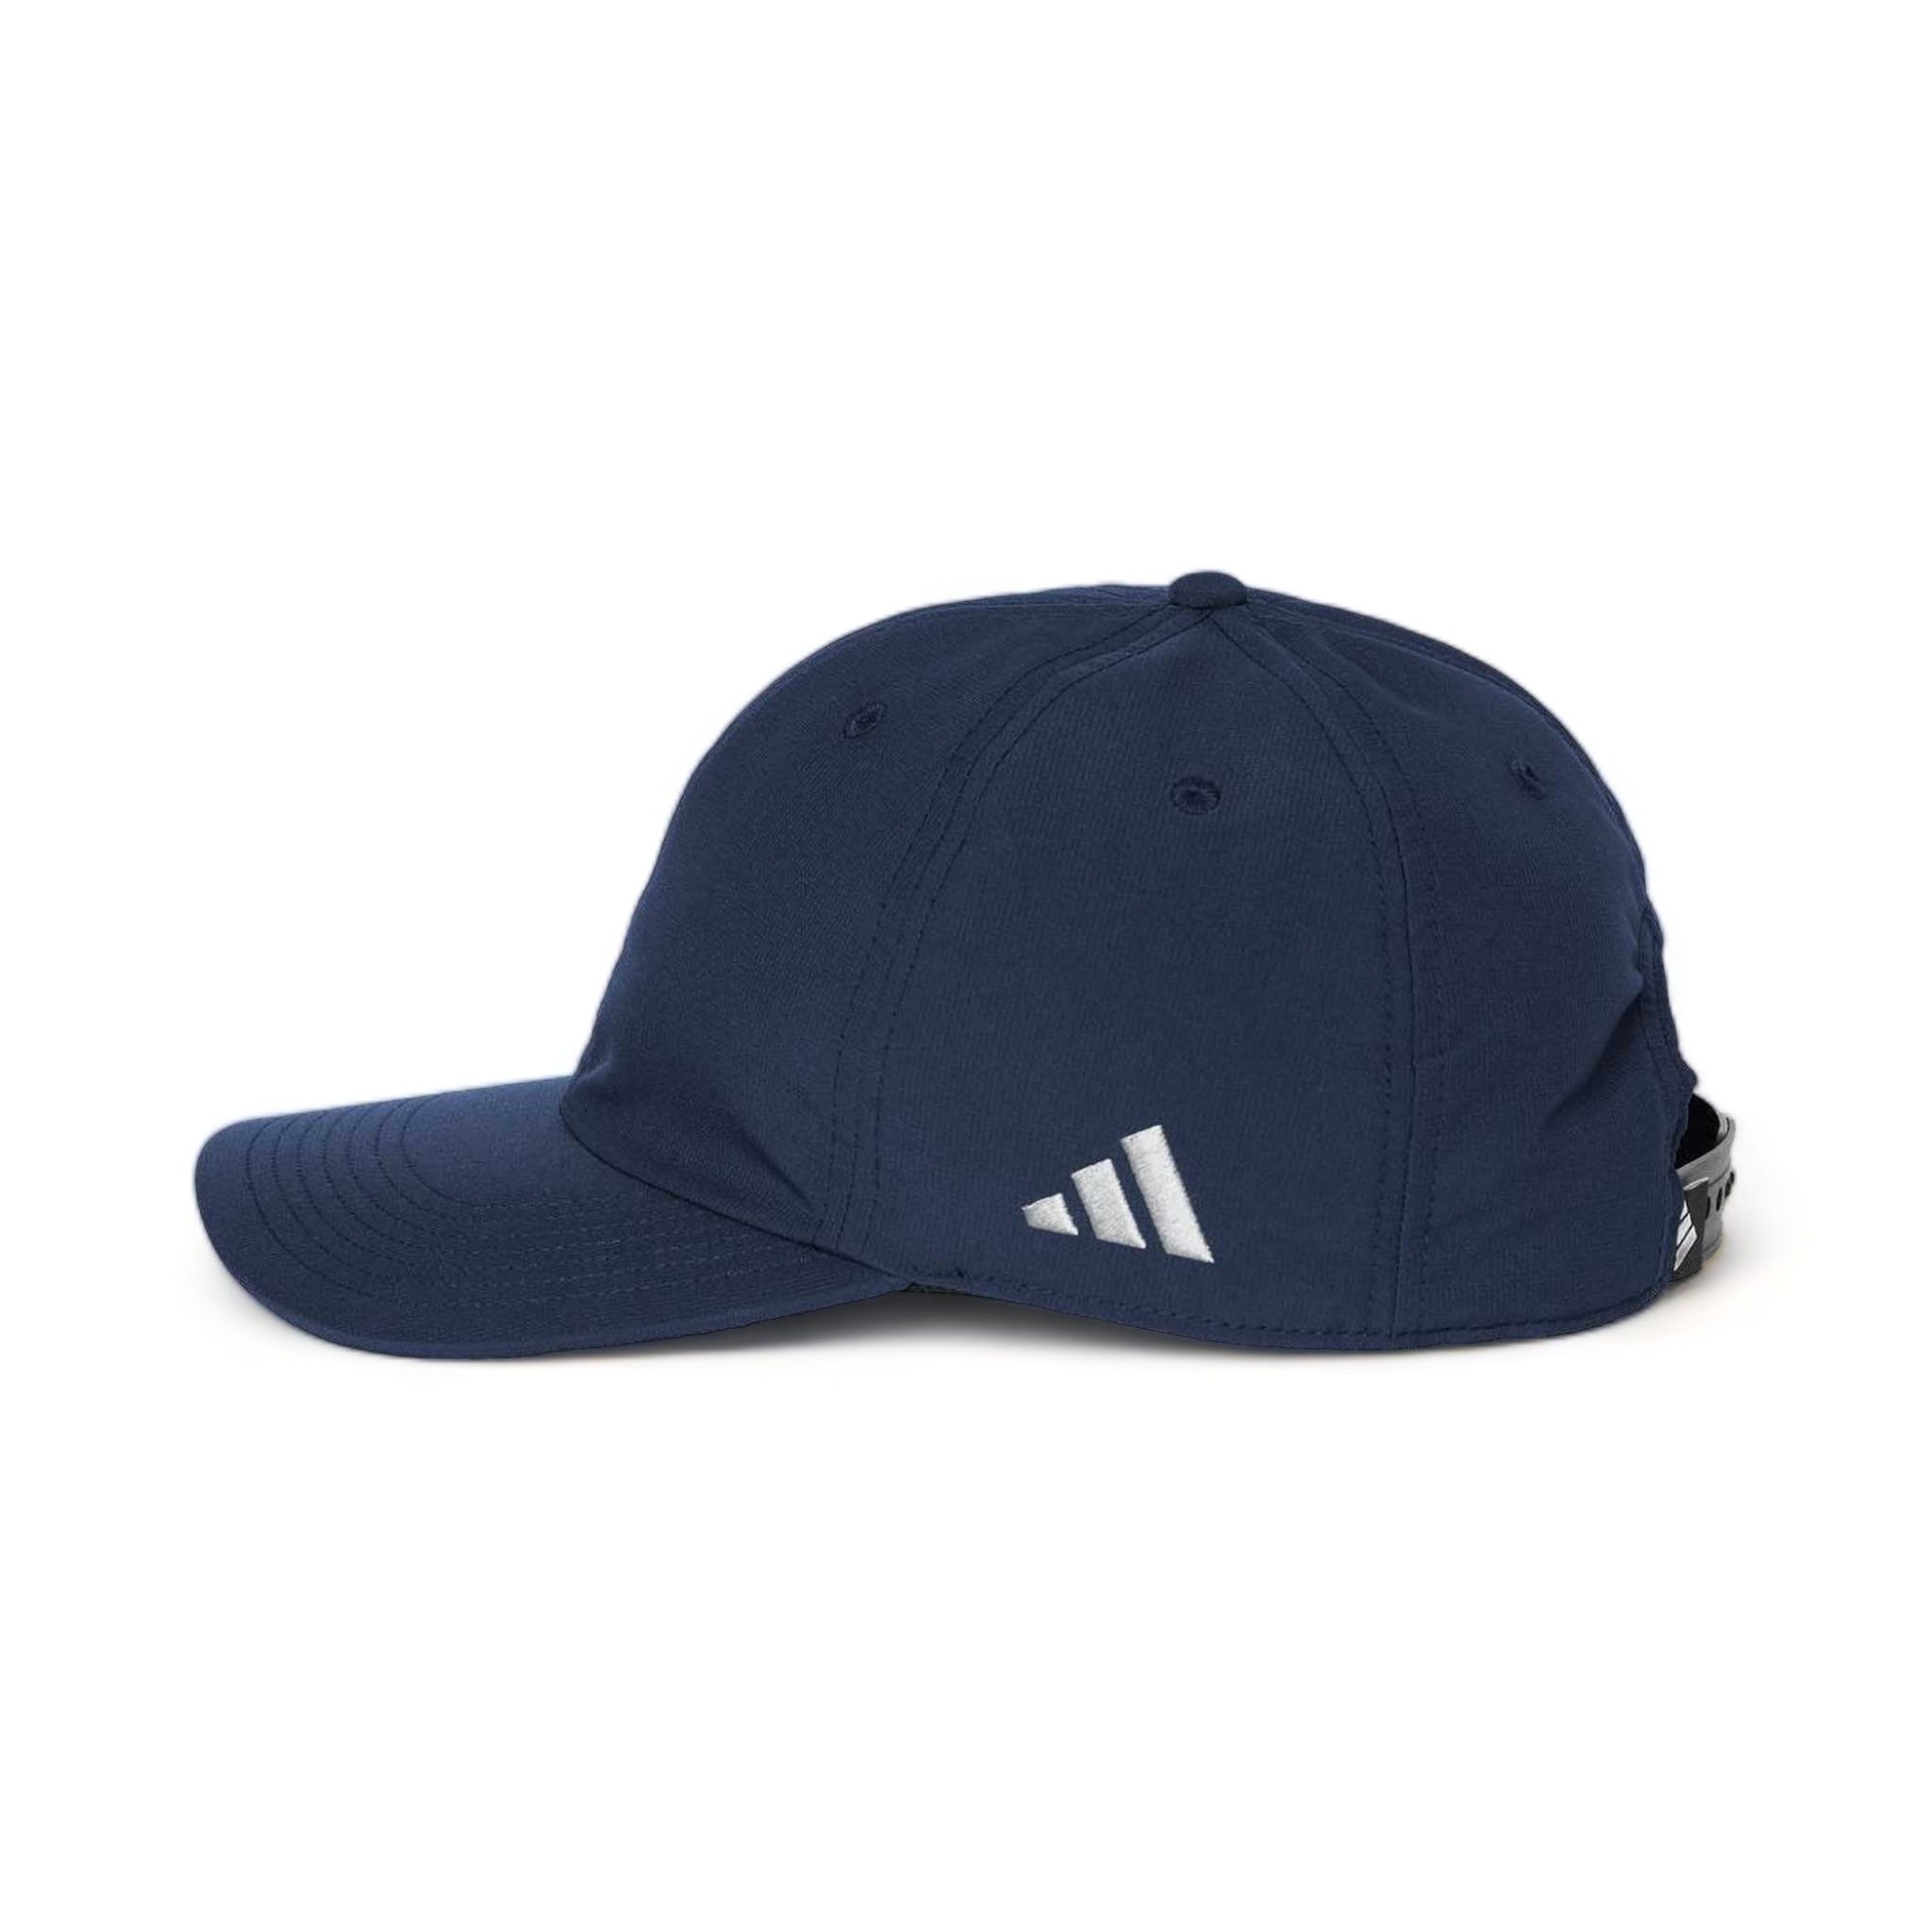 Side view of Adidas A600S custom hat in collegiate navy